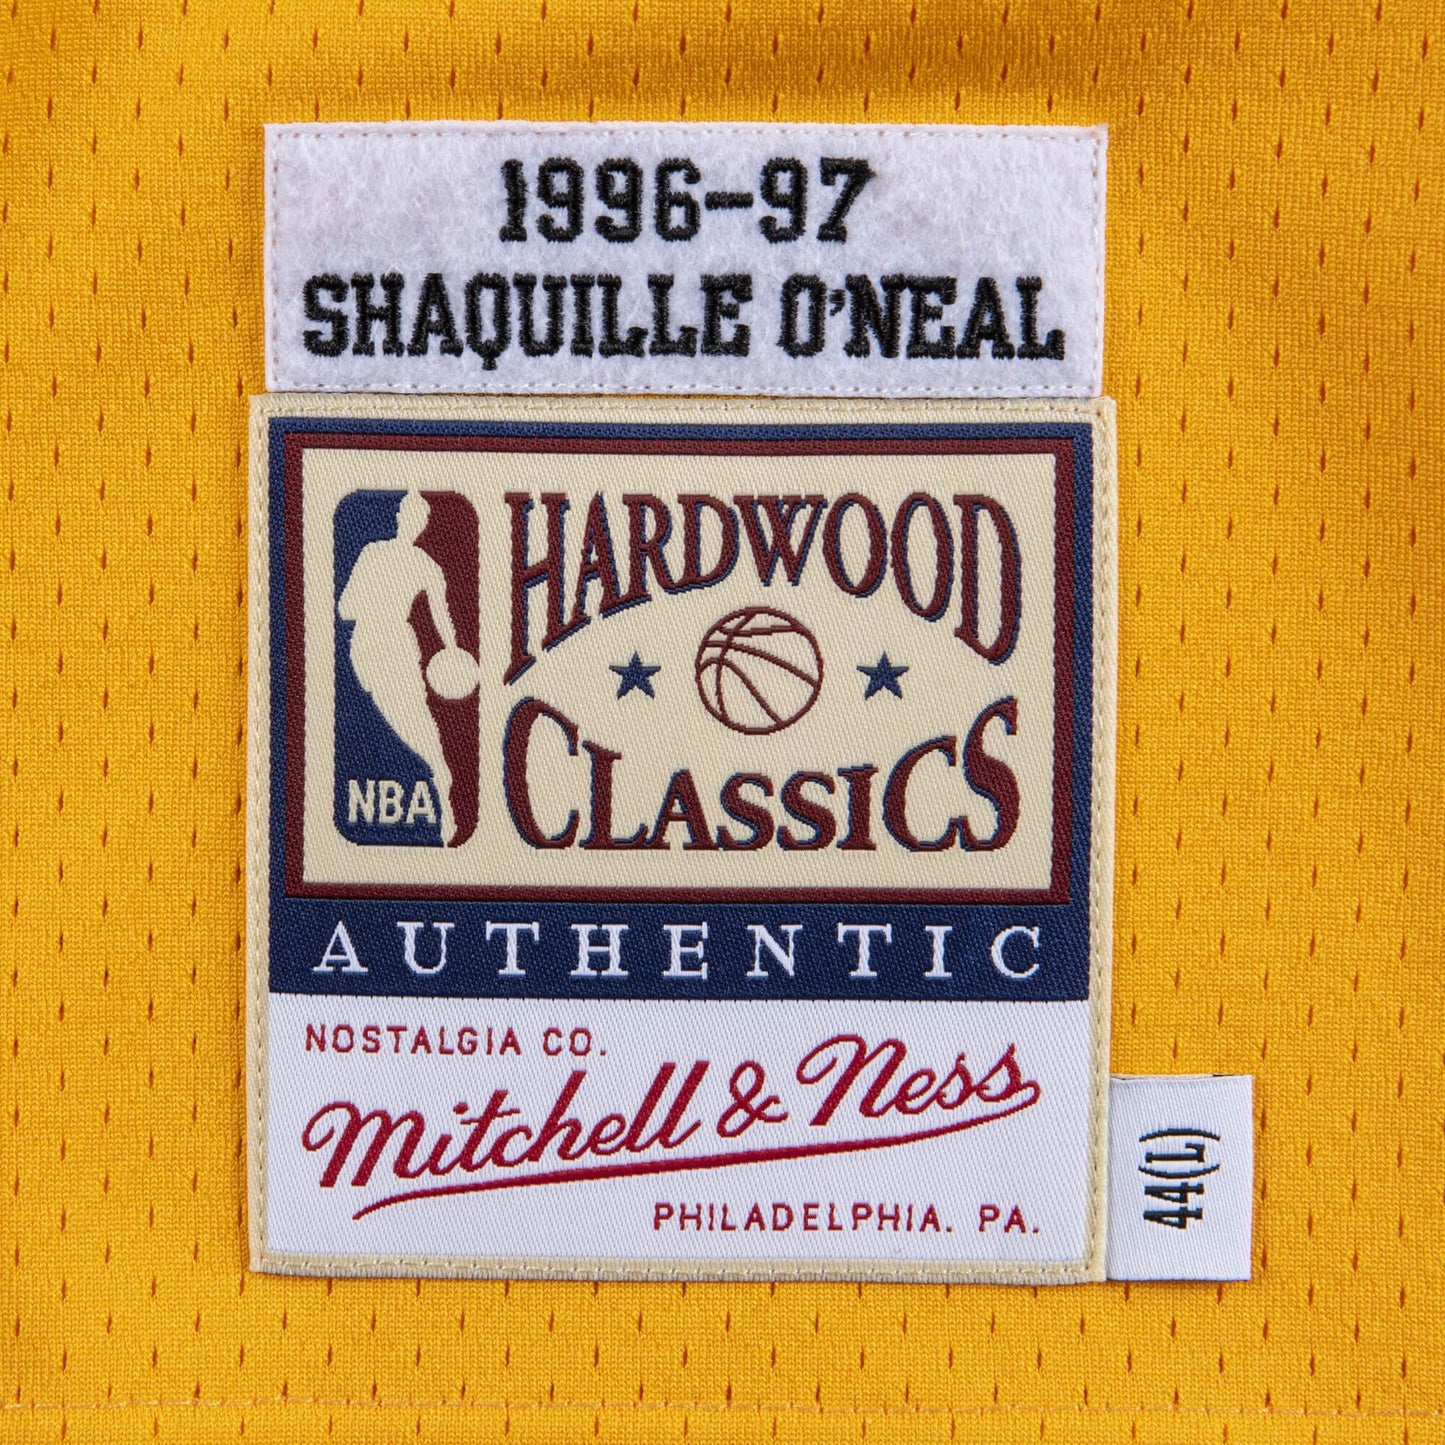 Authentic Jersey Los Angeles Lakers 1996-97 Shaquille O'Neal